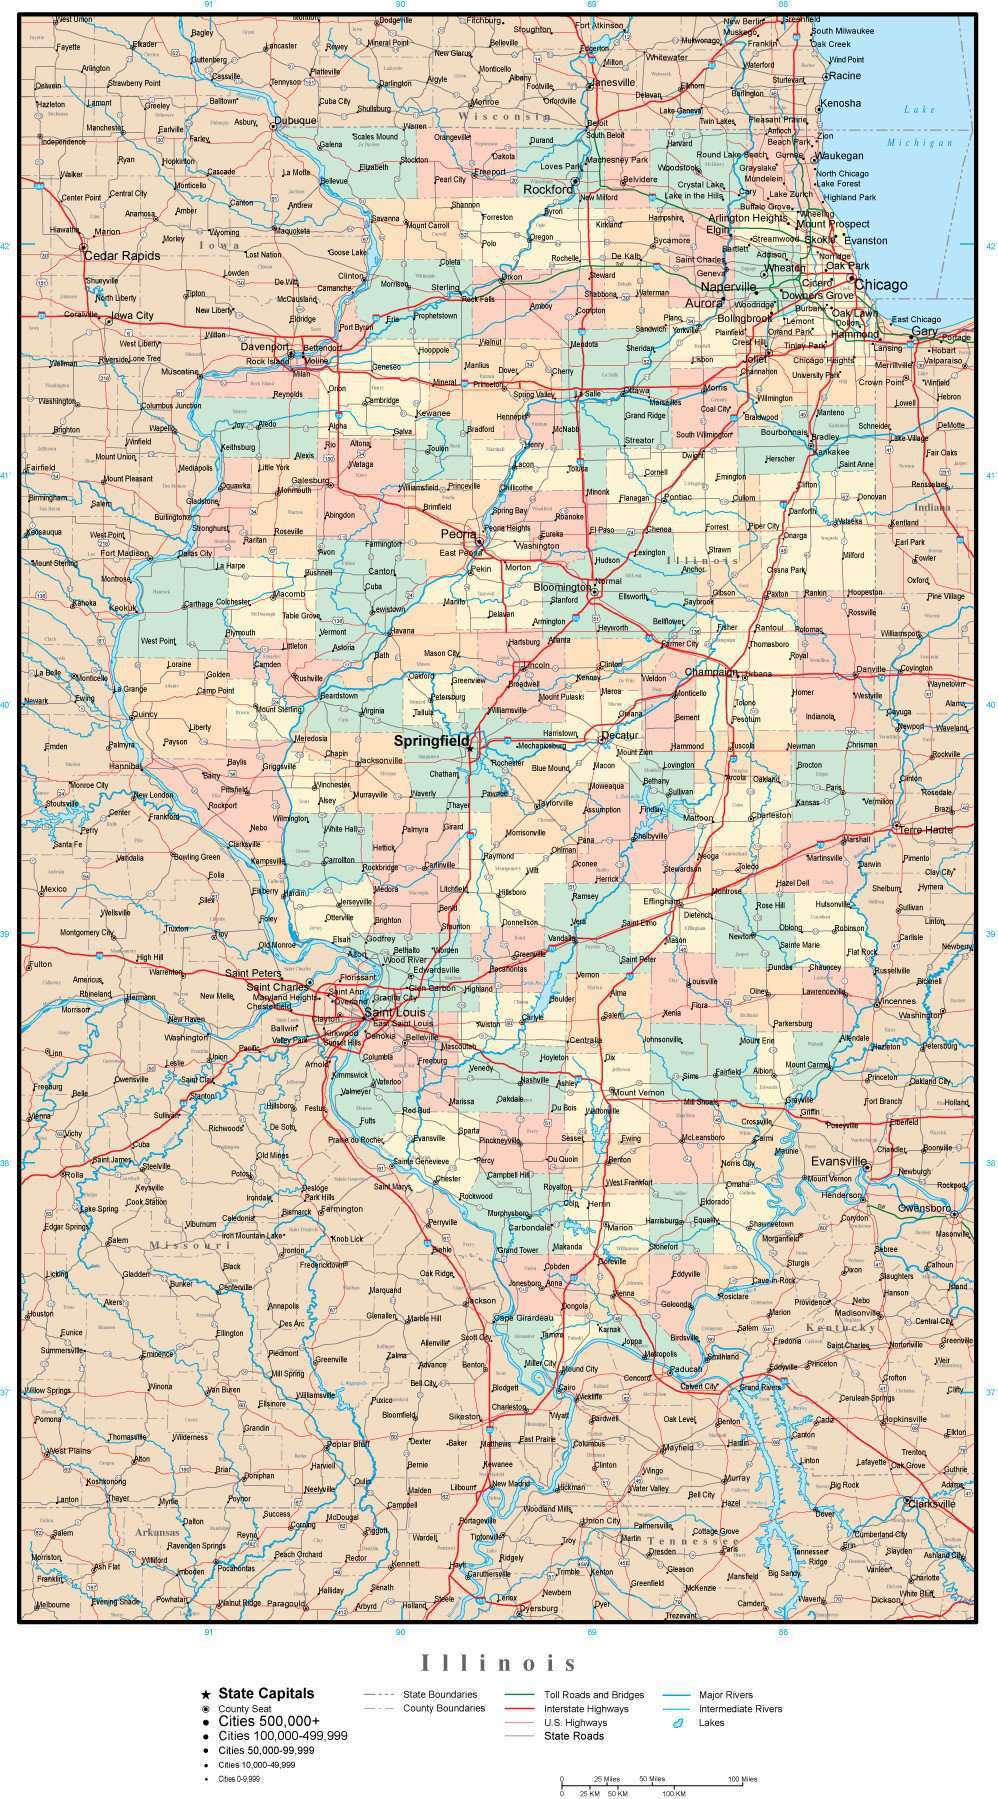 Illinois Map With Counties And Cities Illinois Adobe Illustrator Map with Counties, Cities, County Seats 